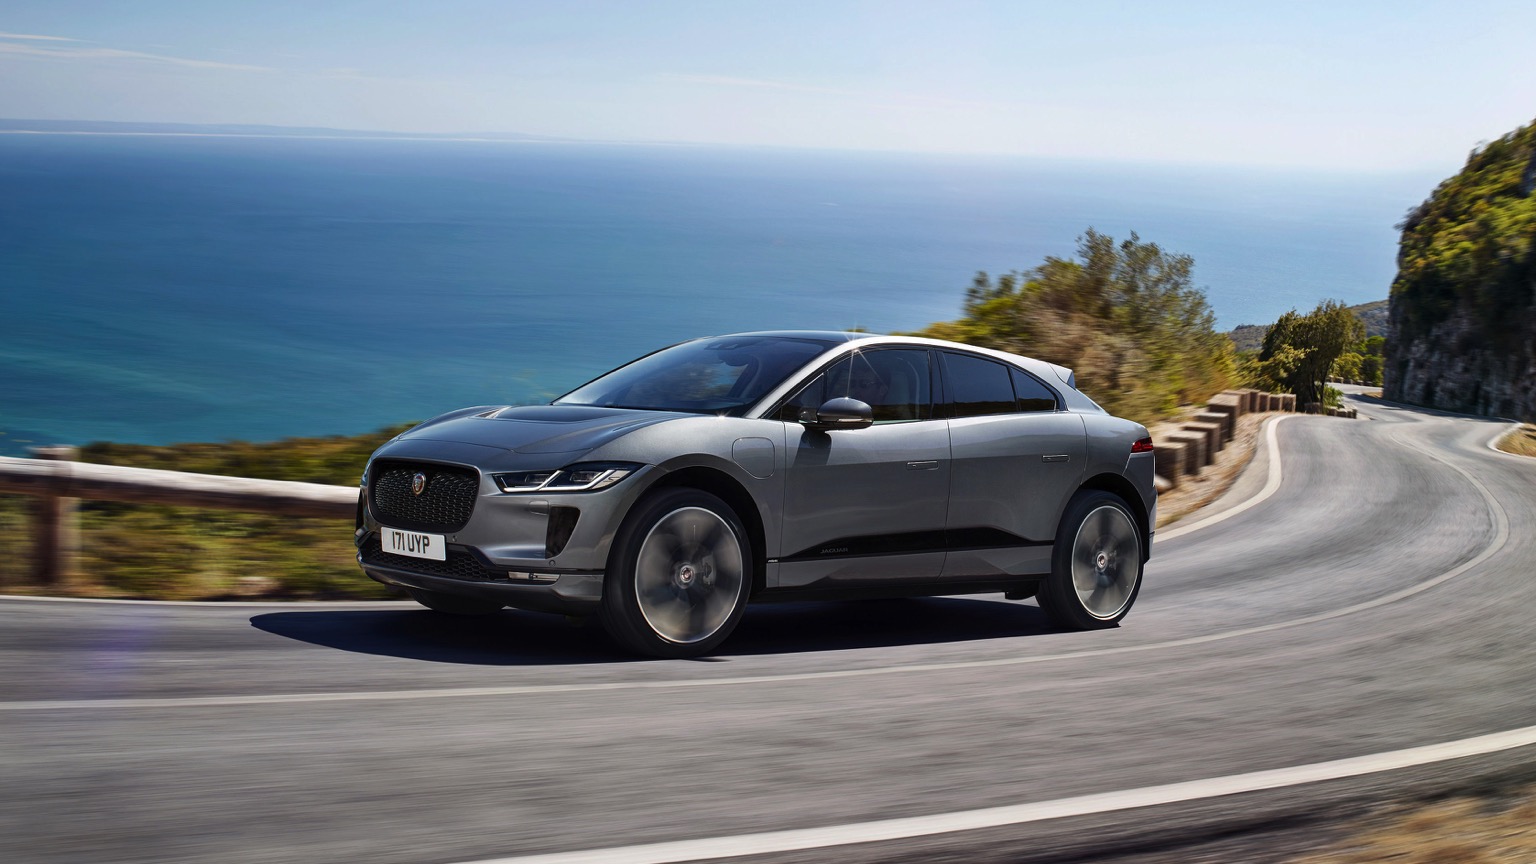 Electric Jaguar I-Pace on the road